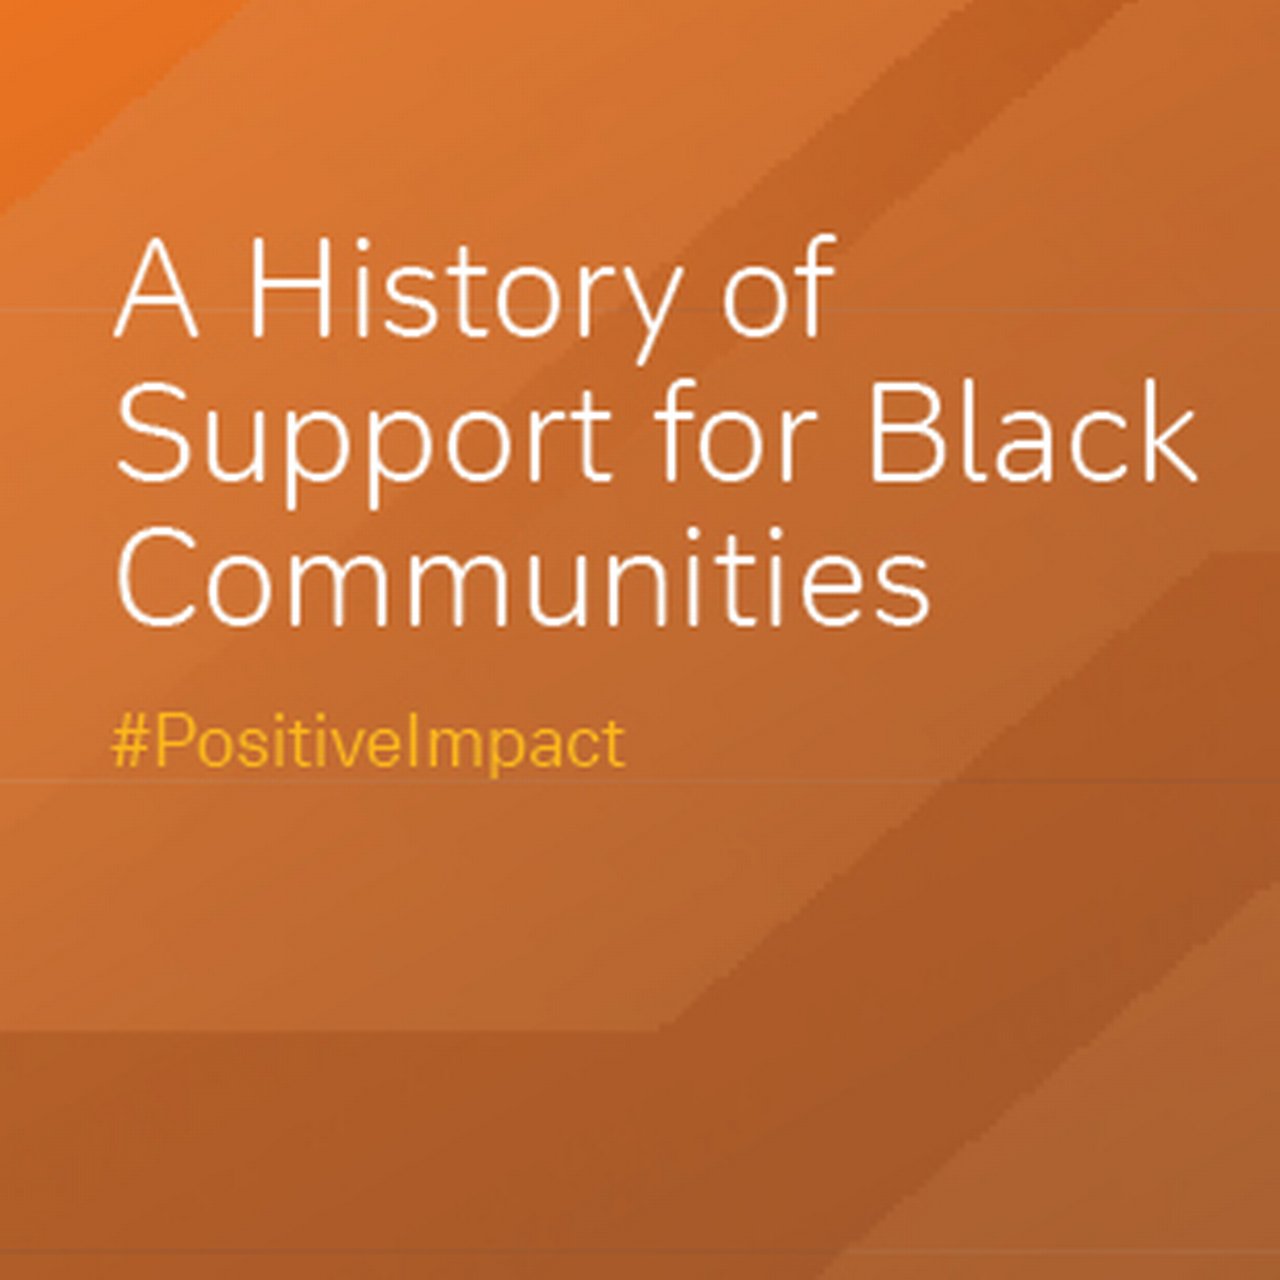 A History of Support for Black Communities